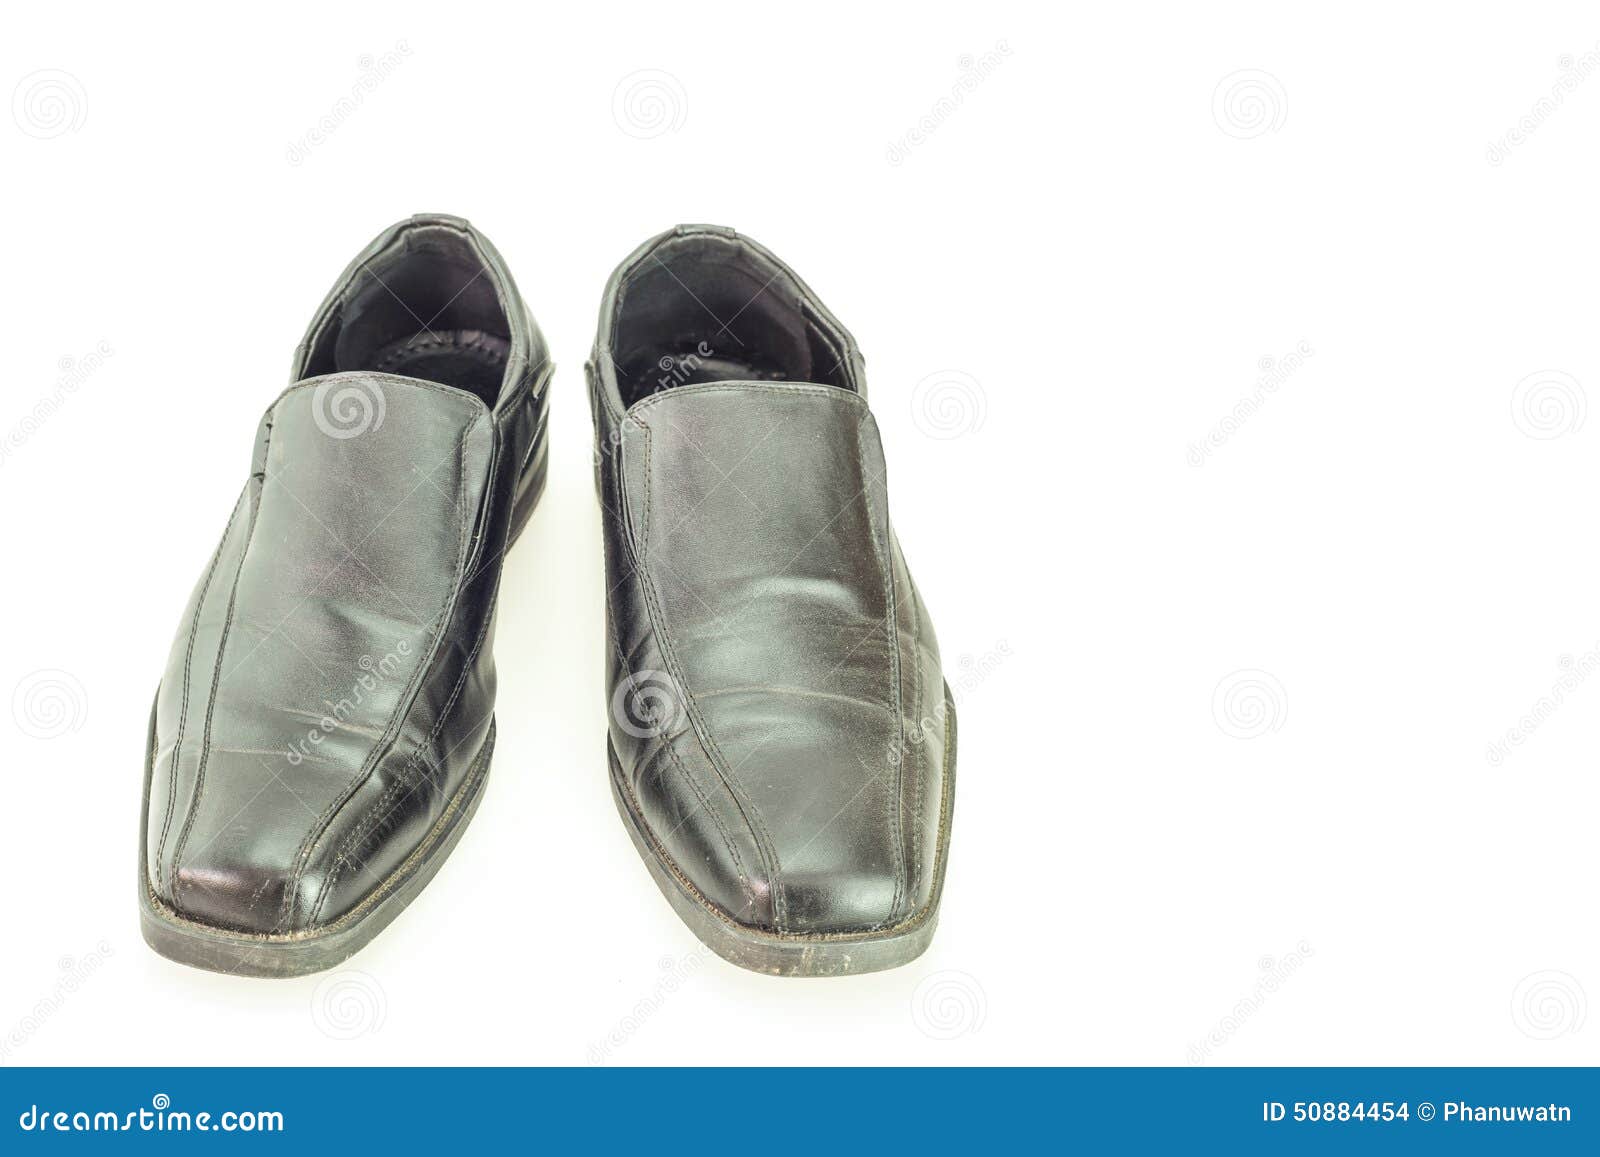 Old black man s shoes stock photo 